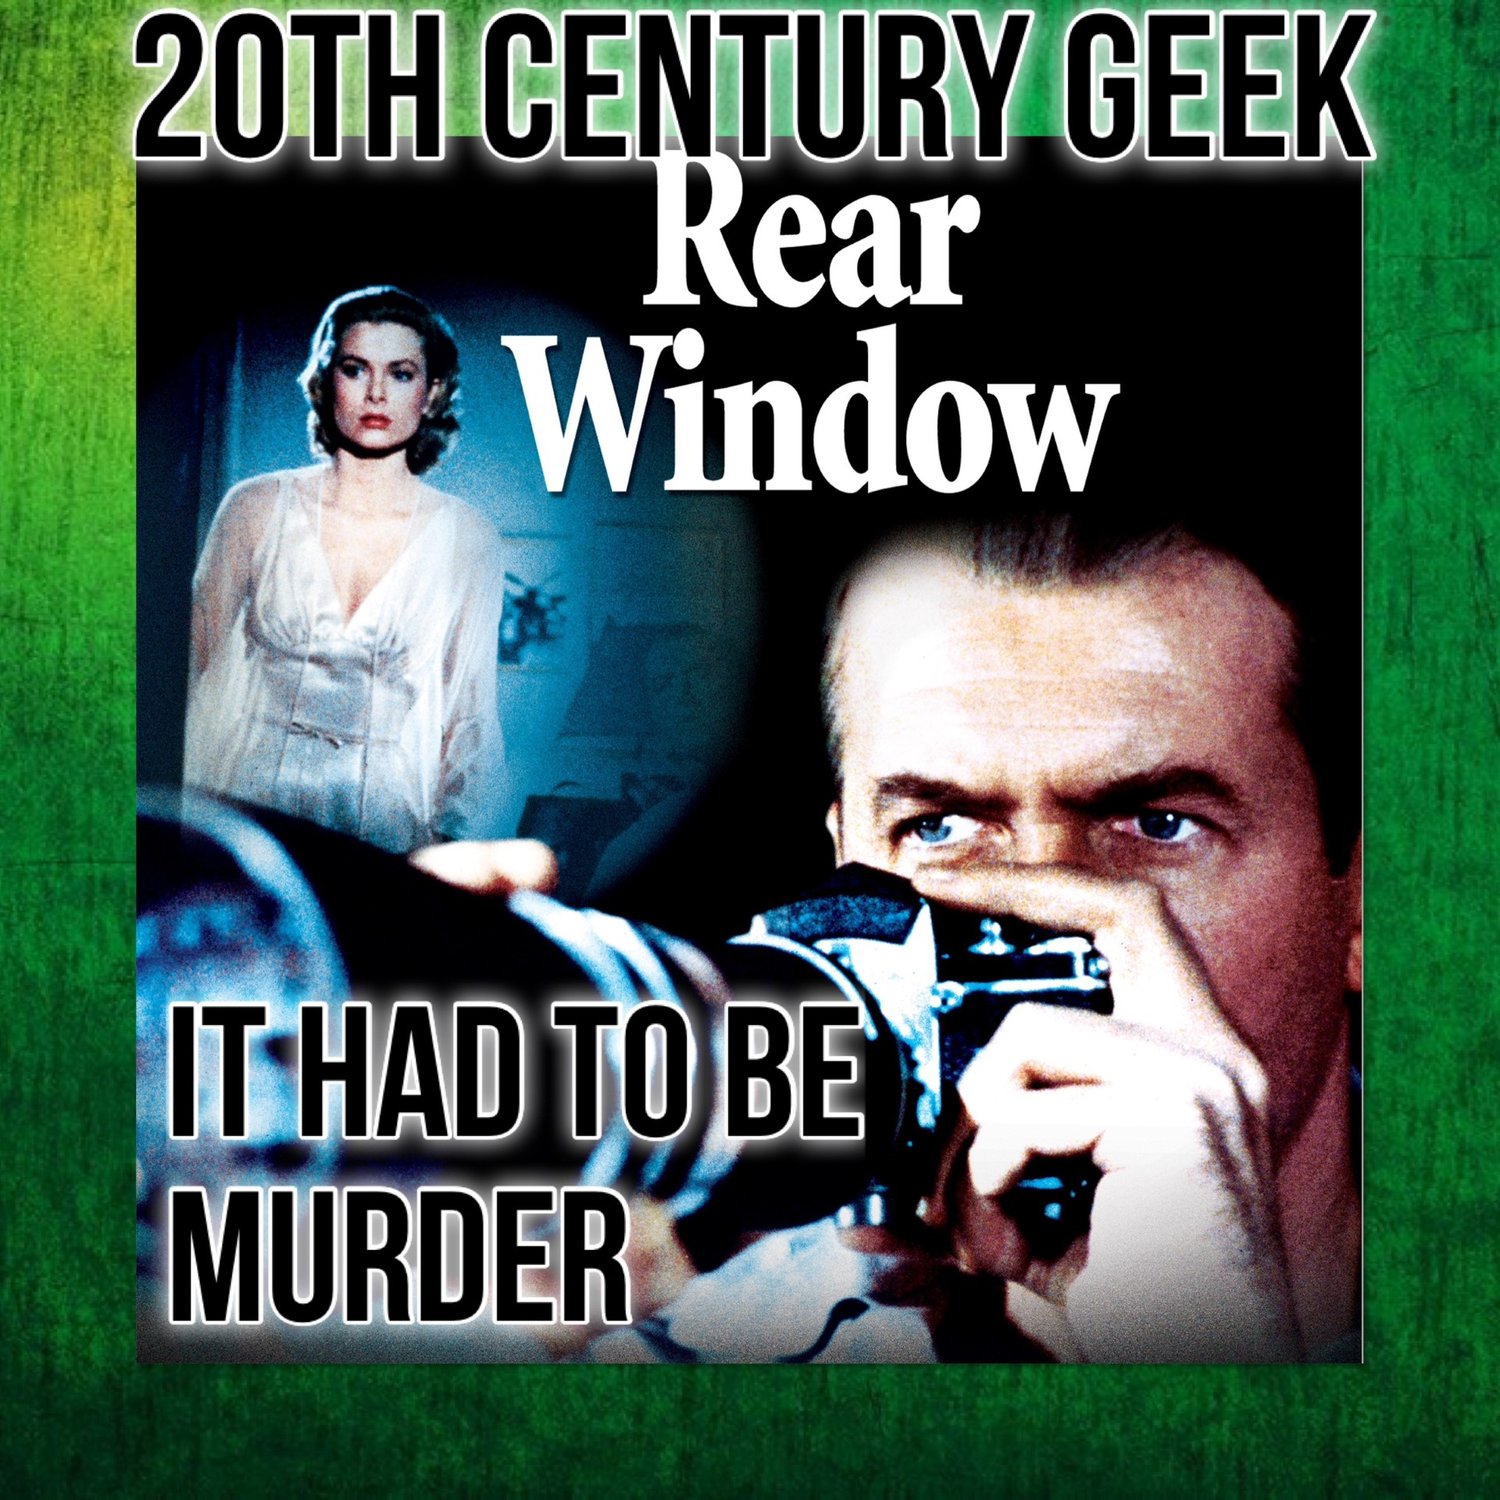 Episode 187 Story Time Rear Window & it had to be murder